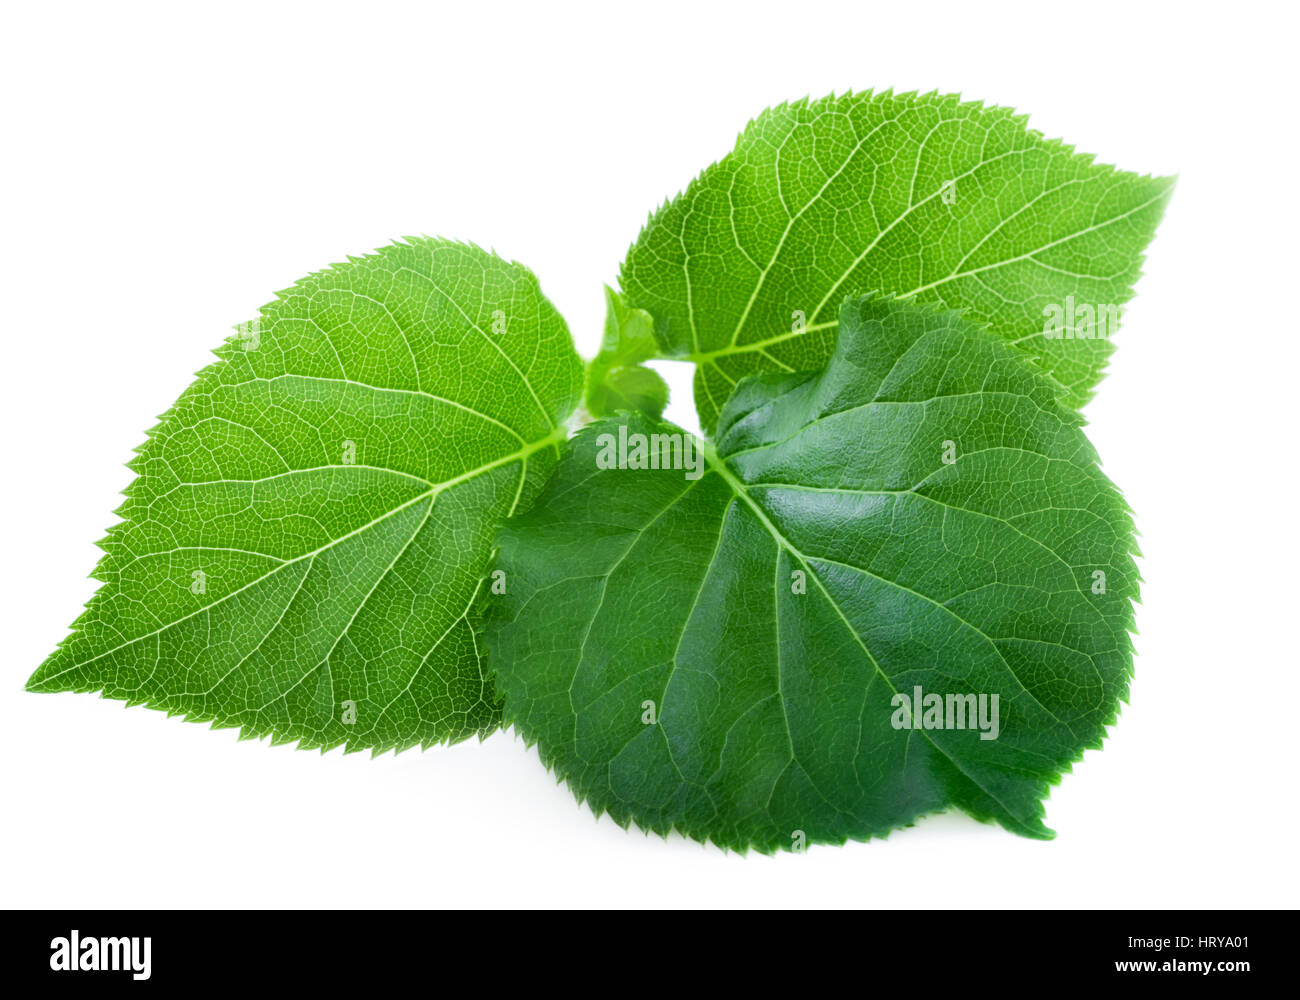 Young fresh new green spring leaf on white background Stock Photo